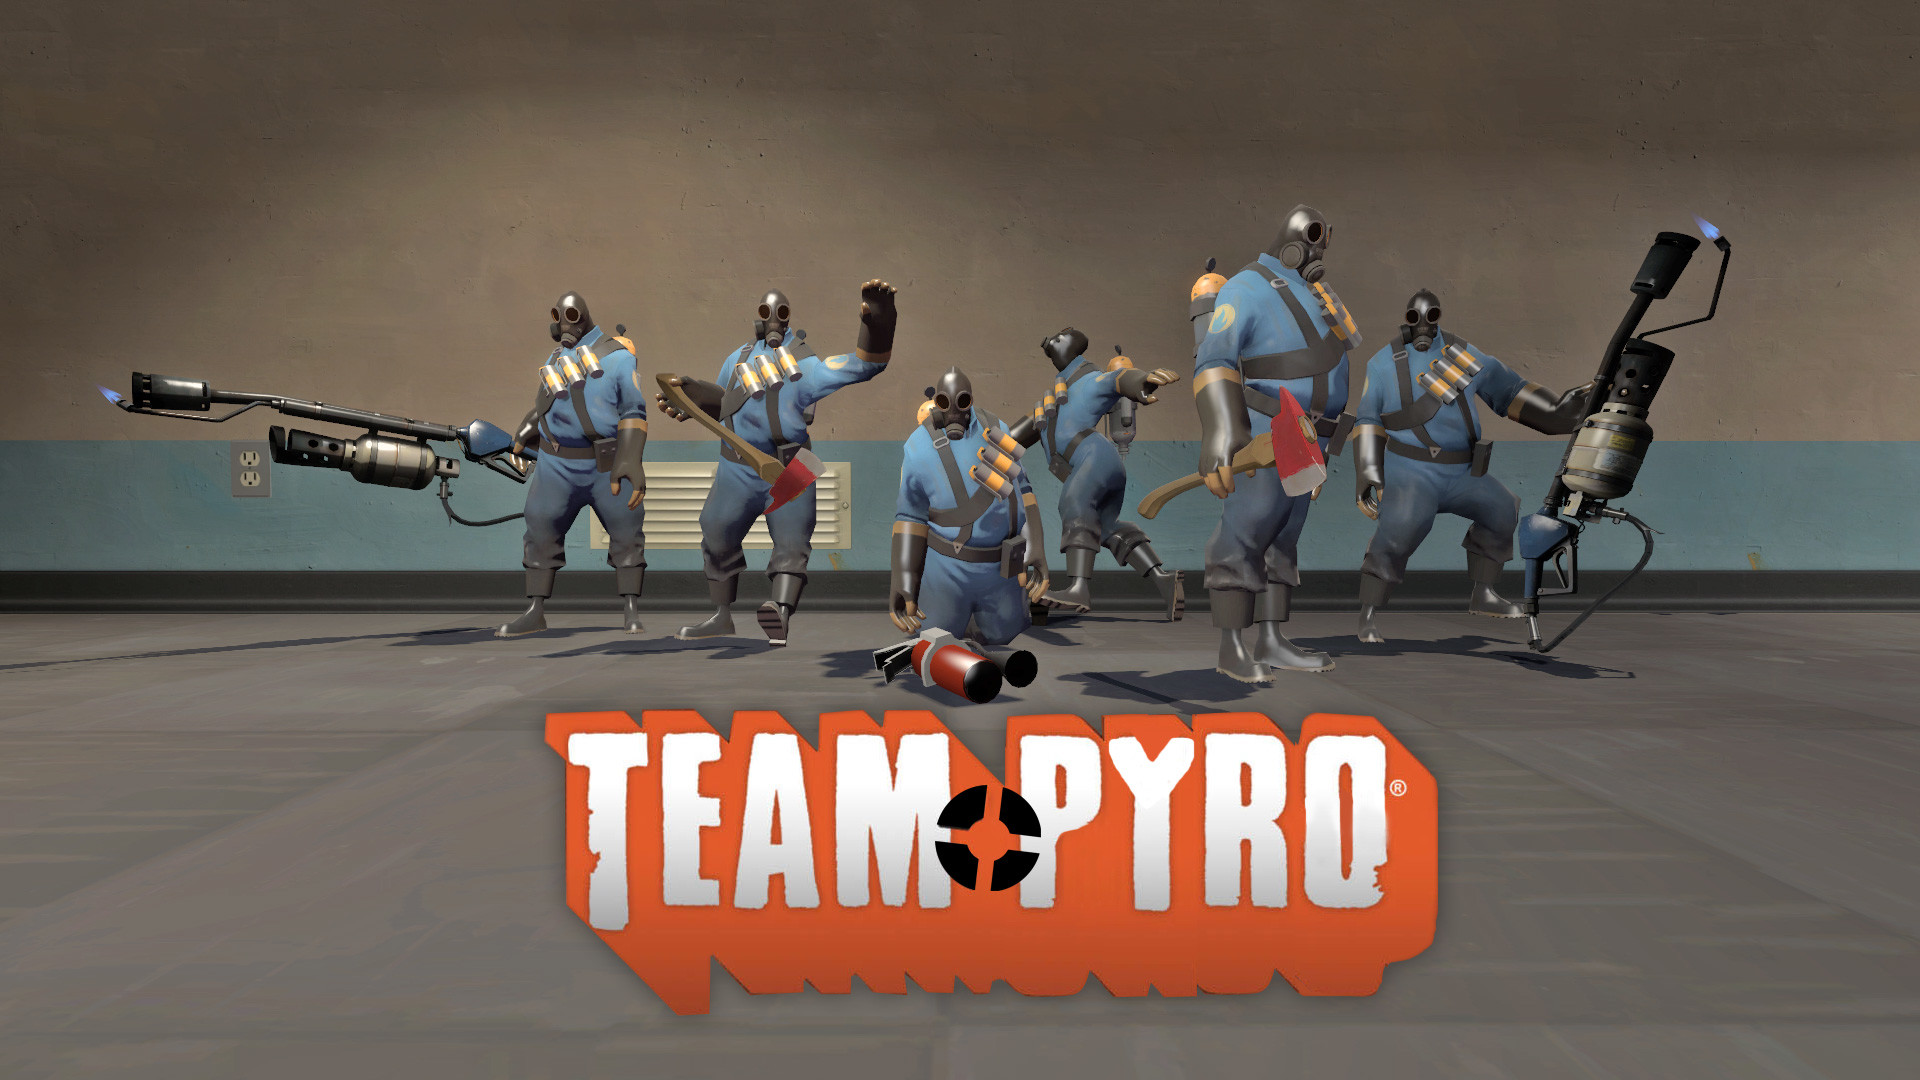 1920x1080 Name 903001 Team Fortress 2 Computer Wallpapers Desktop Backgrounds  